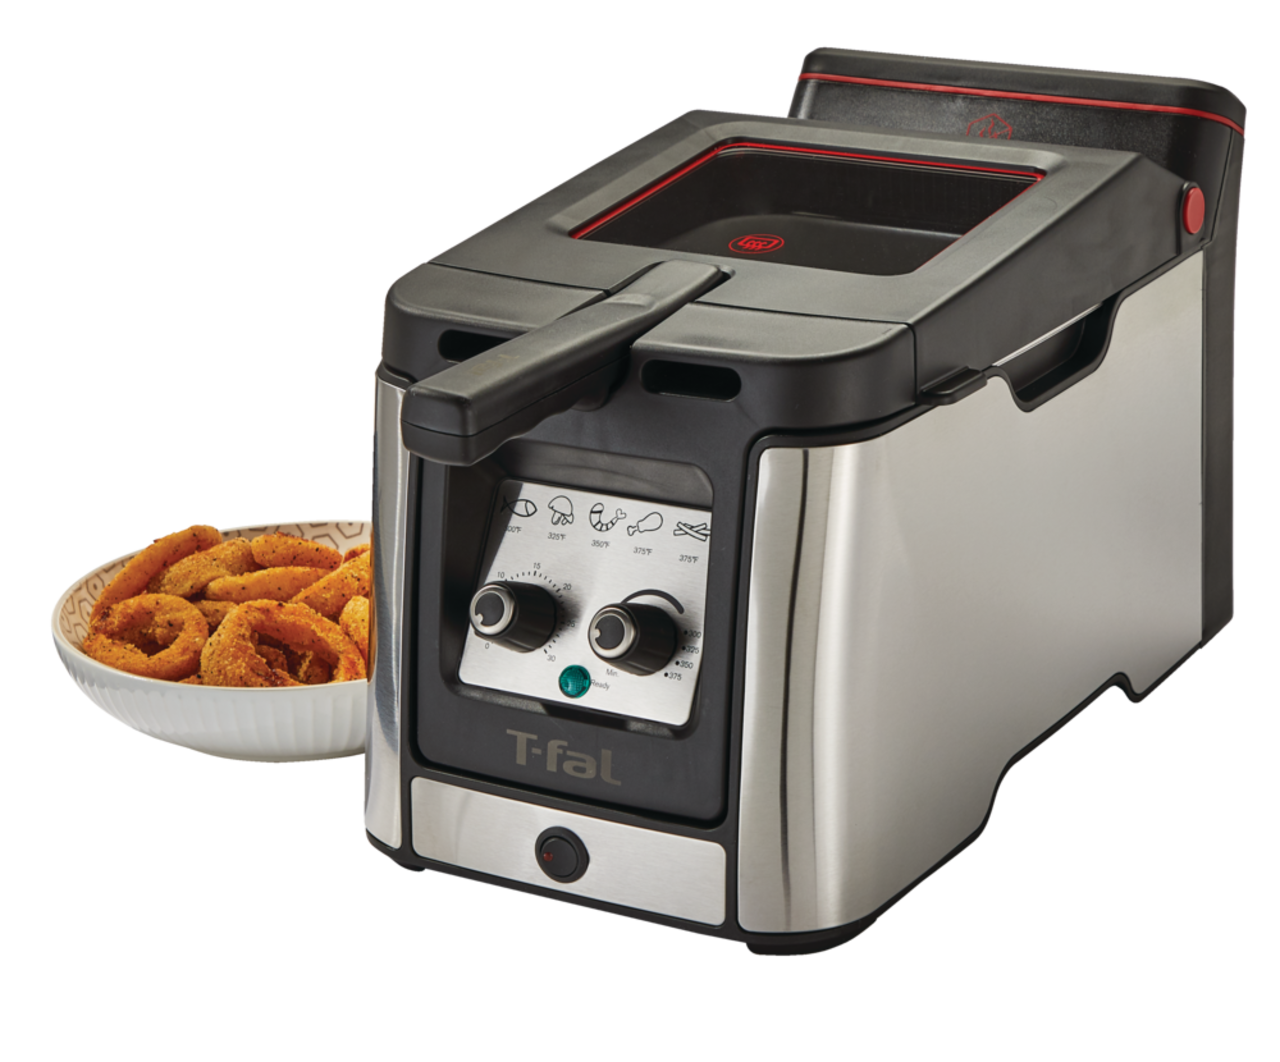 https://media-www.canadiantire.ca/product/living/kitchen/kitchen-appliances/0432765/t-fal-oder-less-deep-fryer-6cf41c67-d55e-433d-ba2c-99e67ca6f0b2.png?imdensity=1&imwidth=1244&impolicy=mZoom